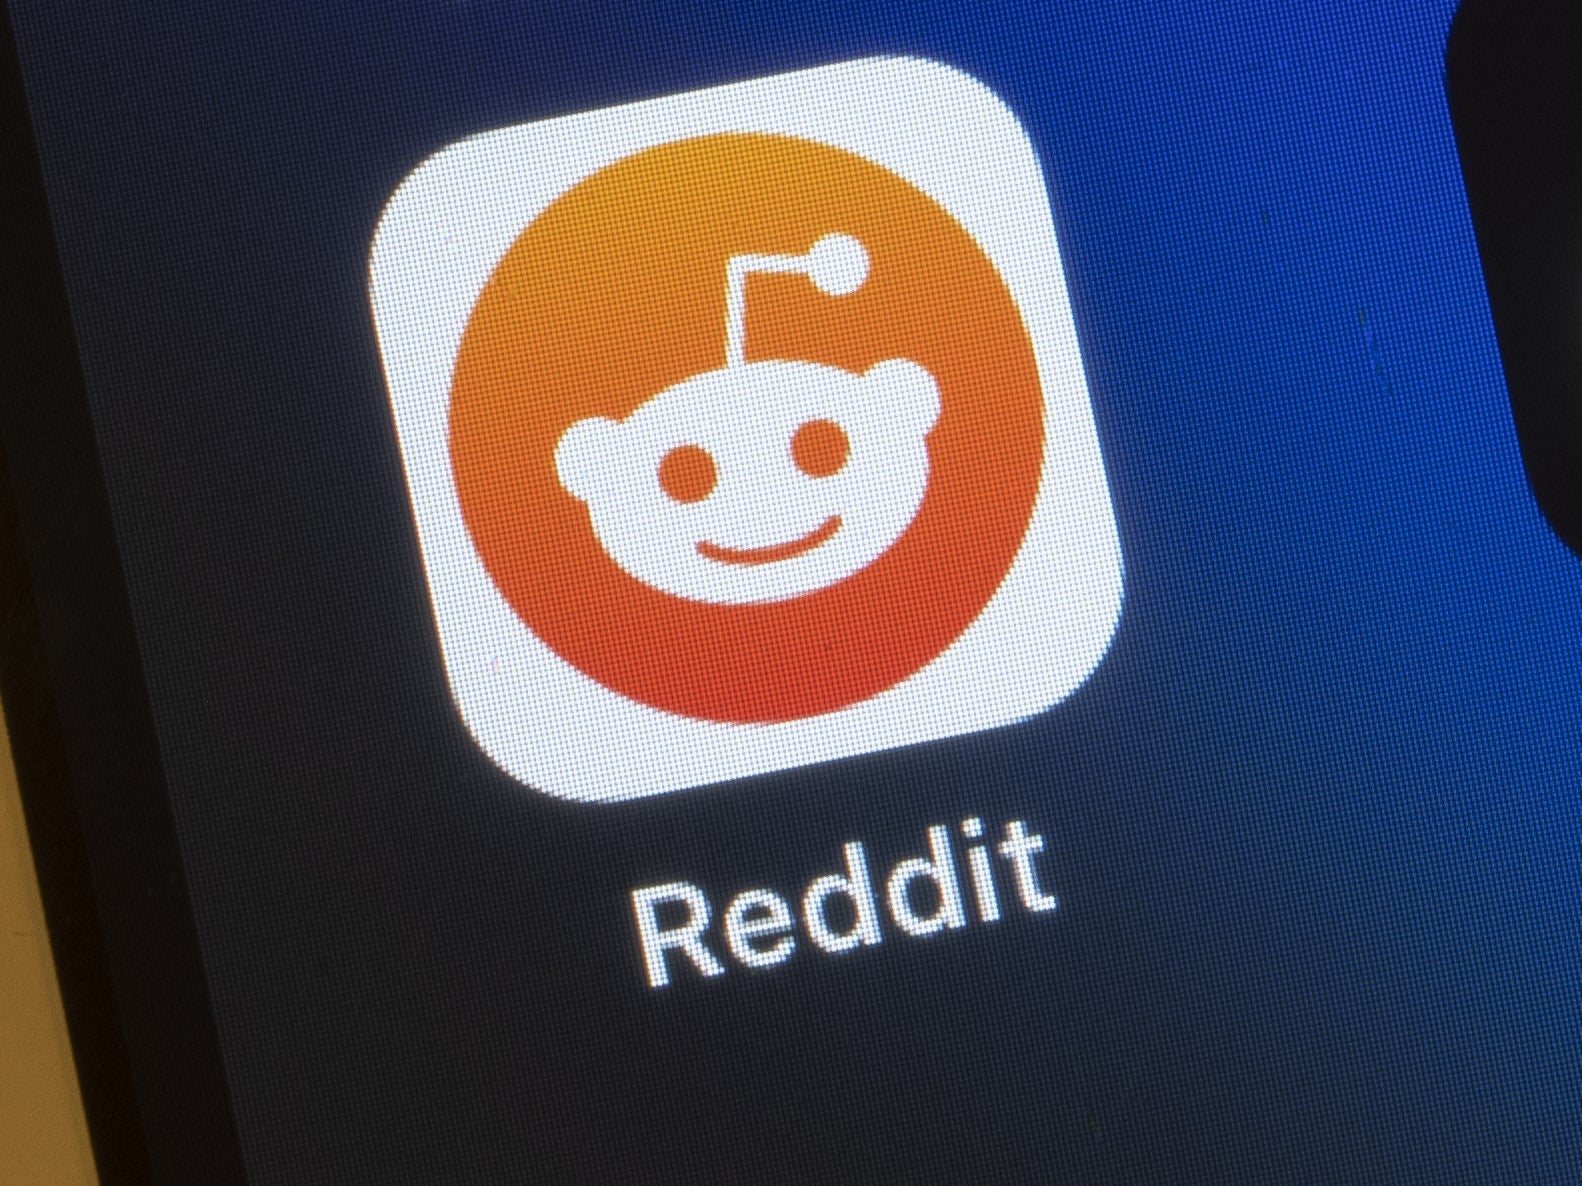 Reddit blackout More than 3,000 subreddits to go dark in protest to new changes The Independent